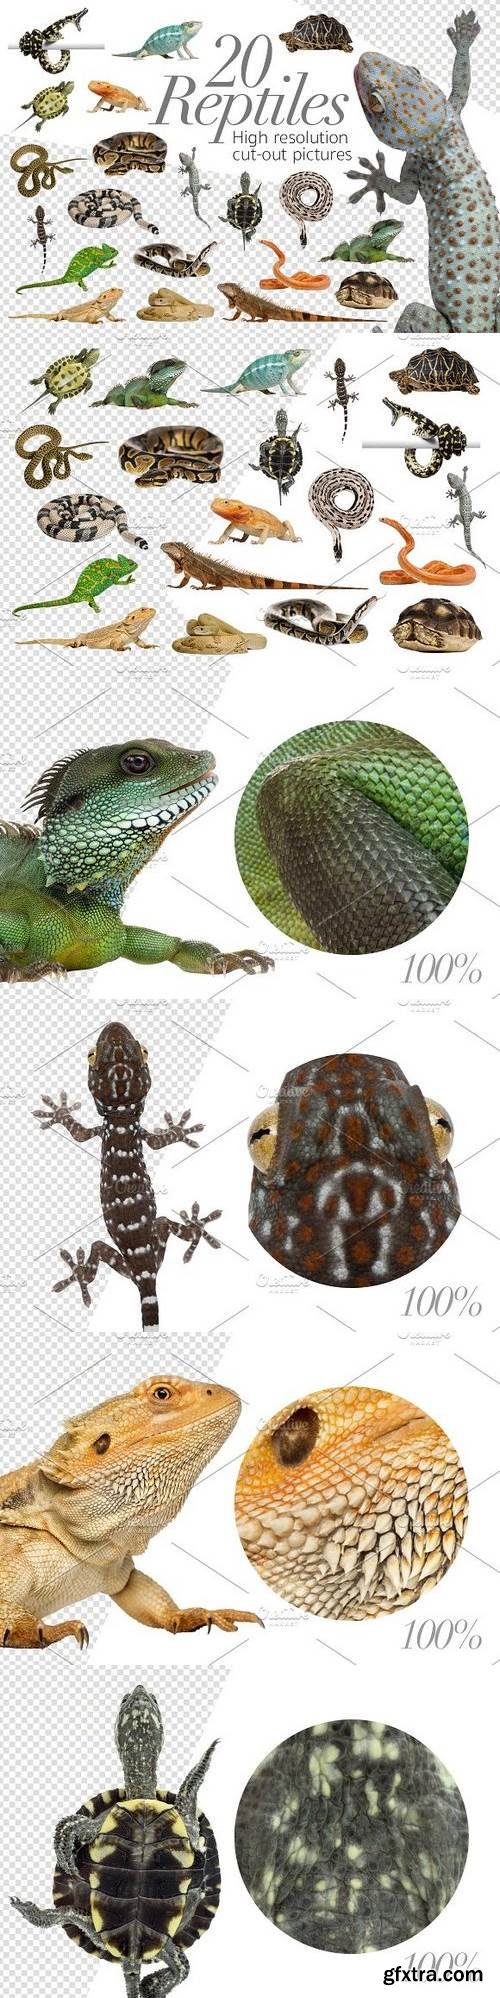 CM - 20 Reptiles - Cut-out Pictures 1333269